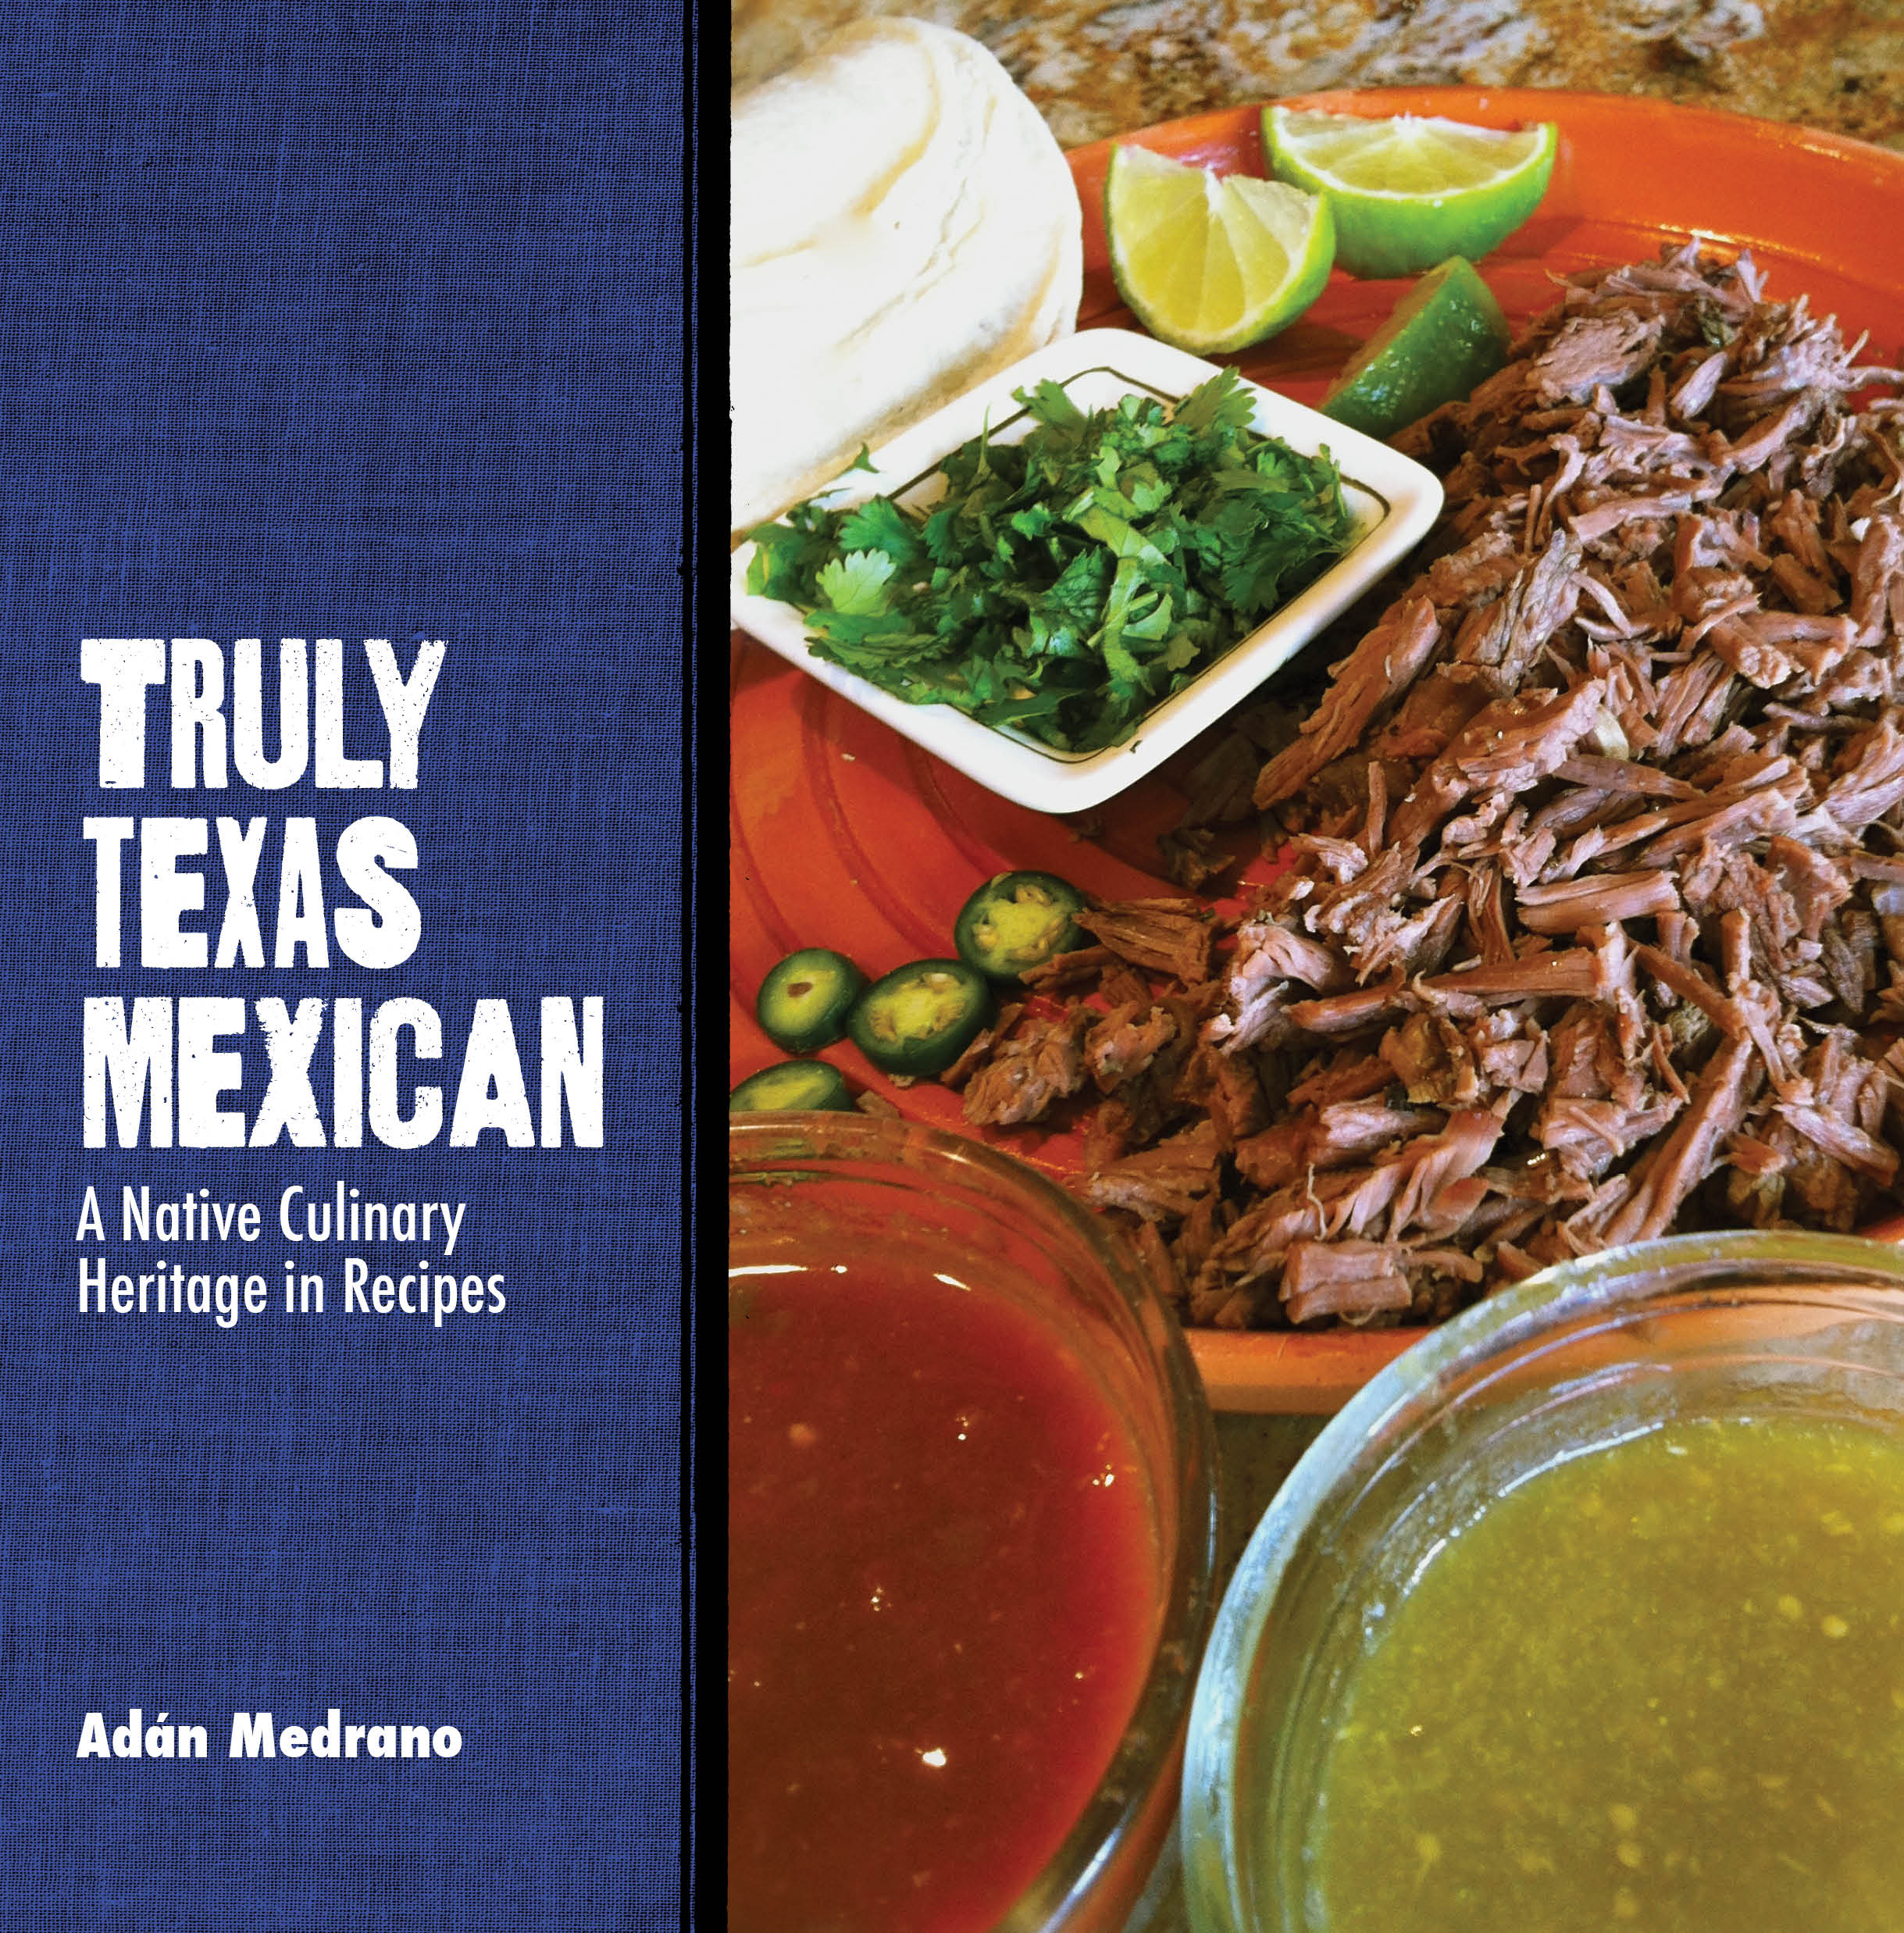 Award-winning cookbook published by Texas Tech University Press, "Truly Texas Mexican: A Native Culinary Heritage In Recipes"